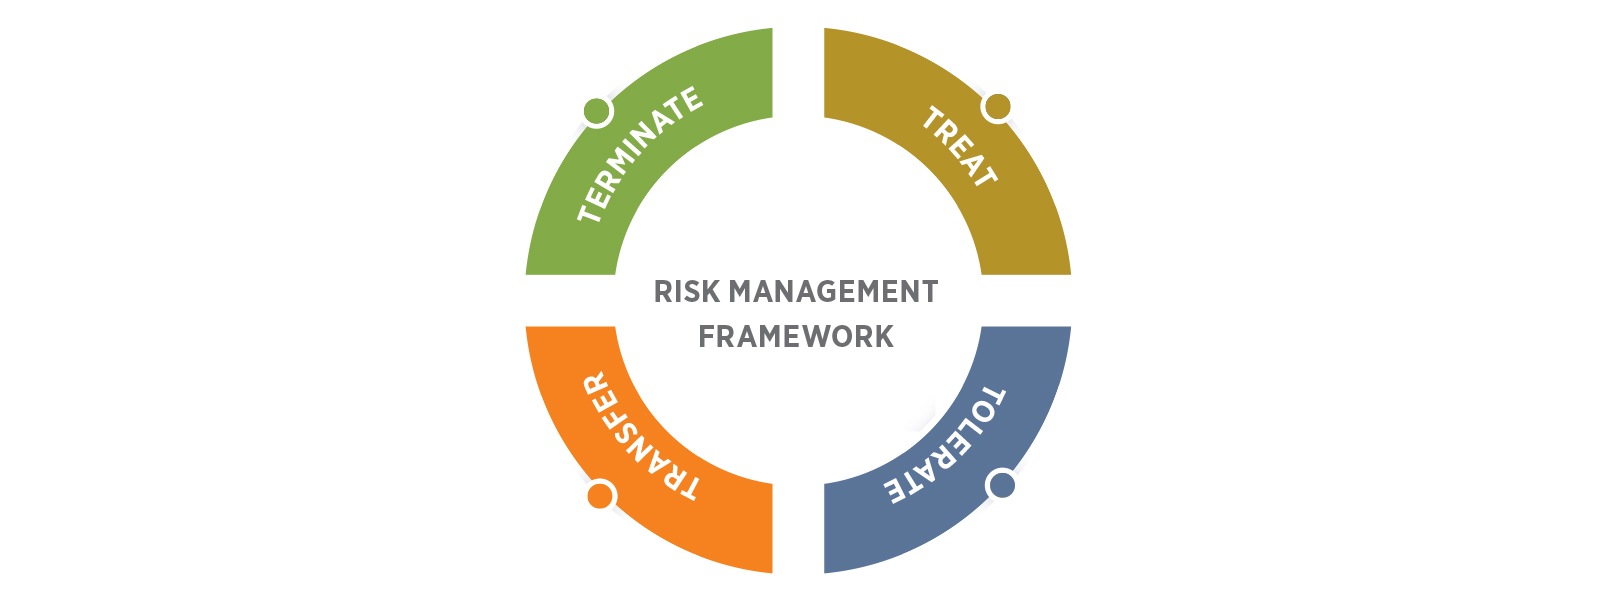 "Risk management in a change-is-constant world"